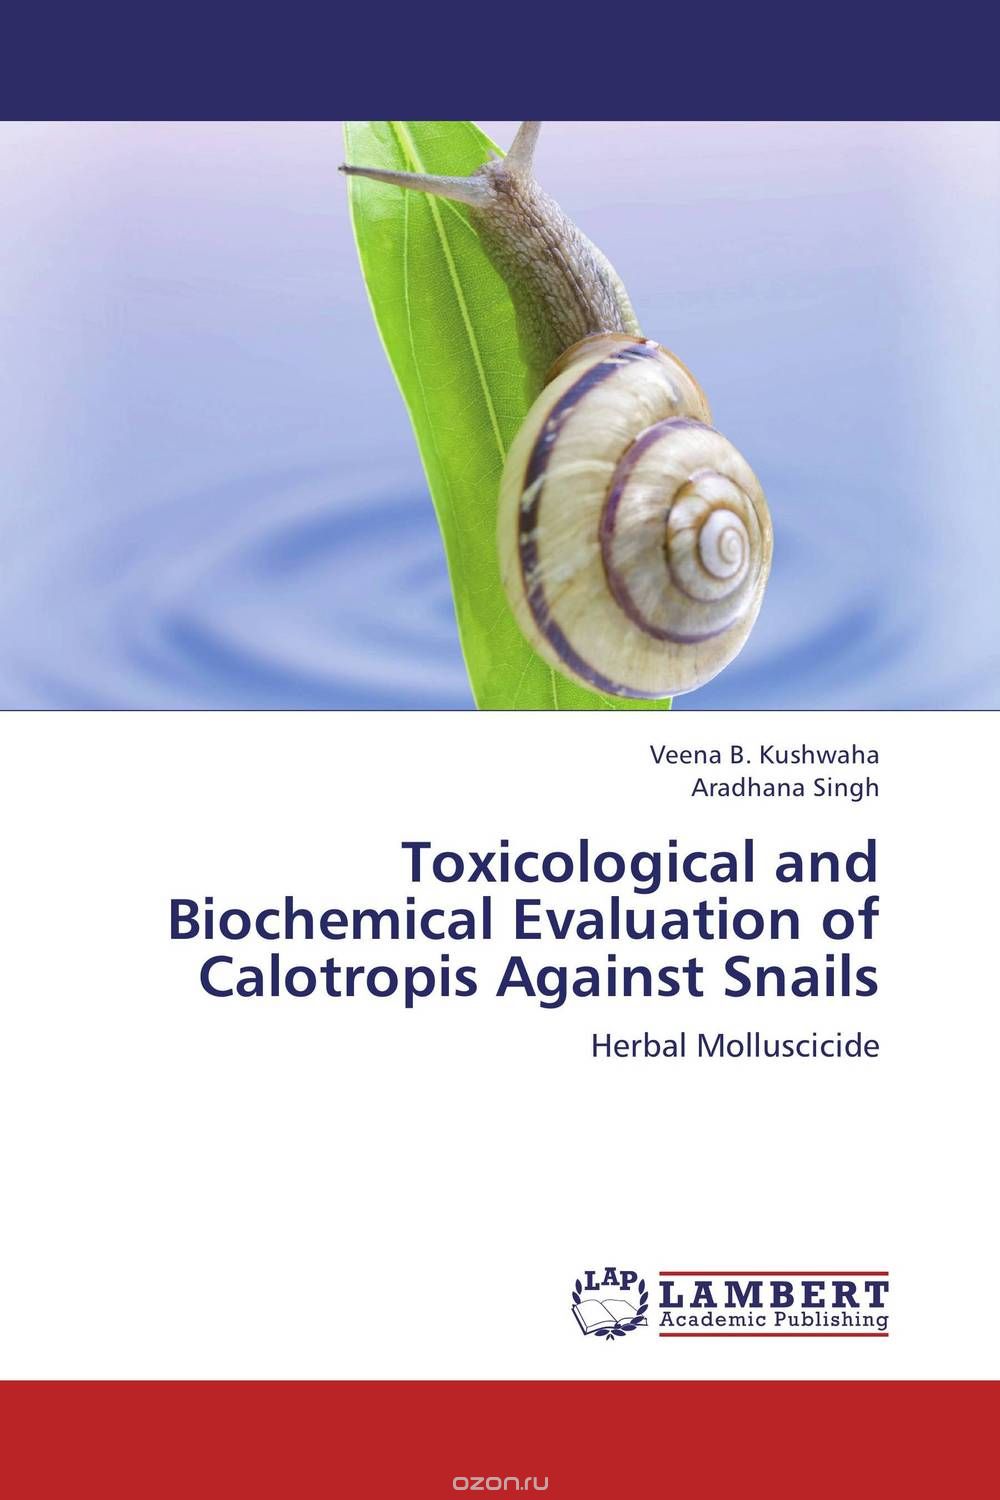 Toxicological and Biochemical Evaluation of Calotropis Against Snails